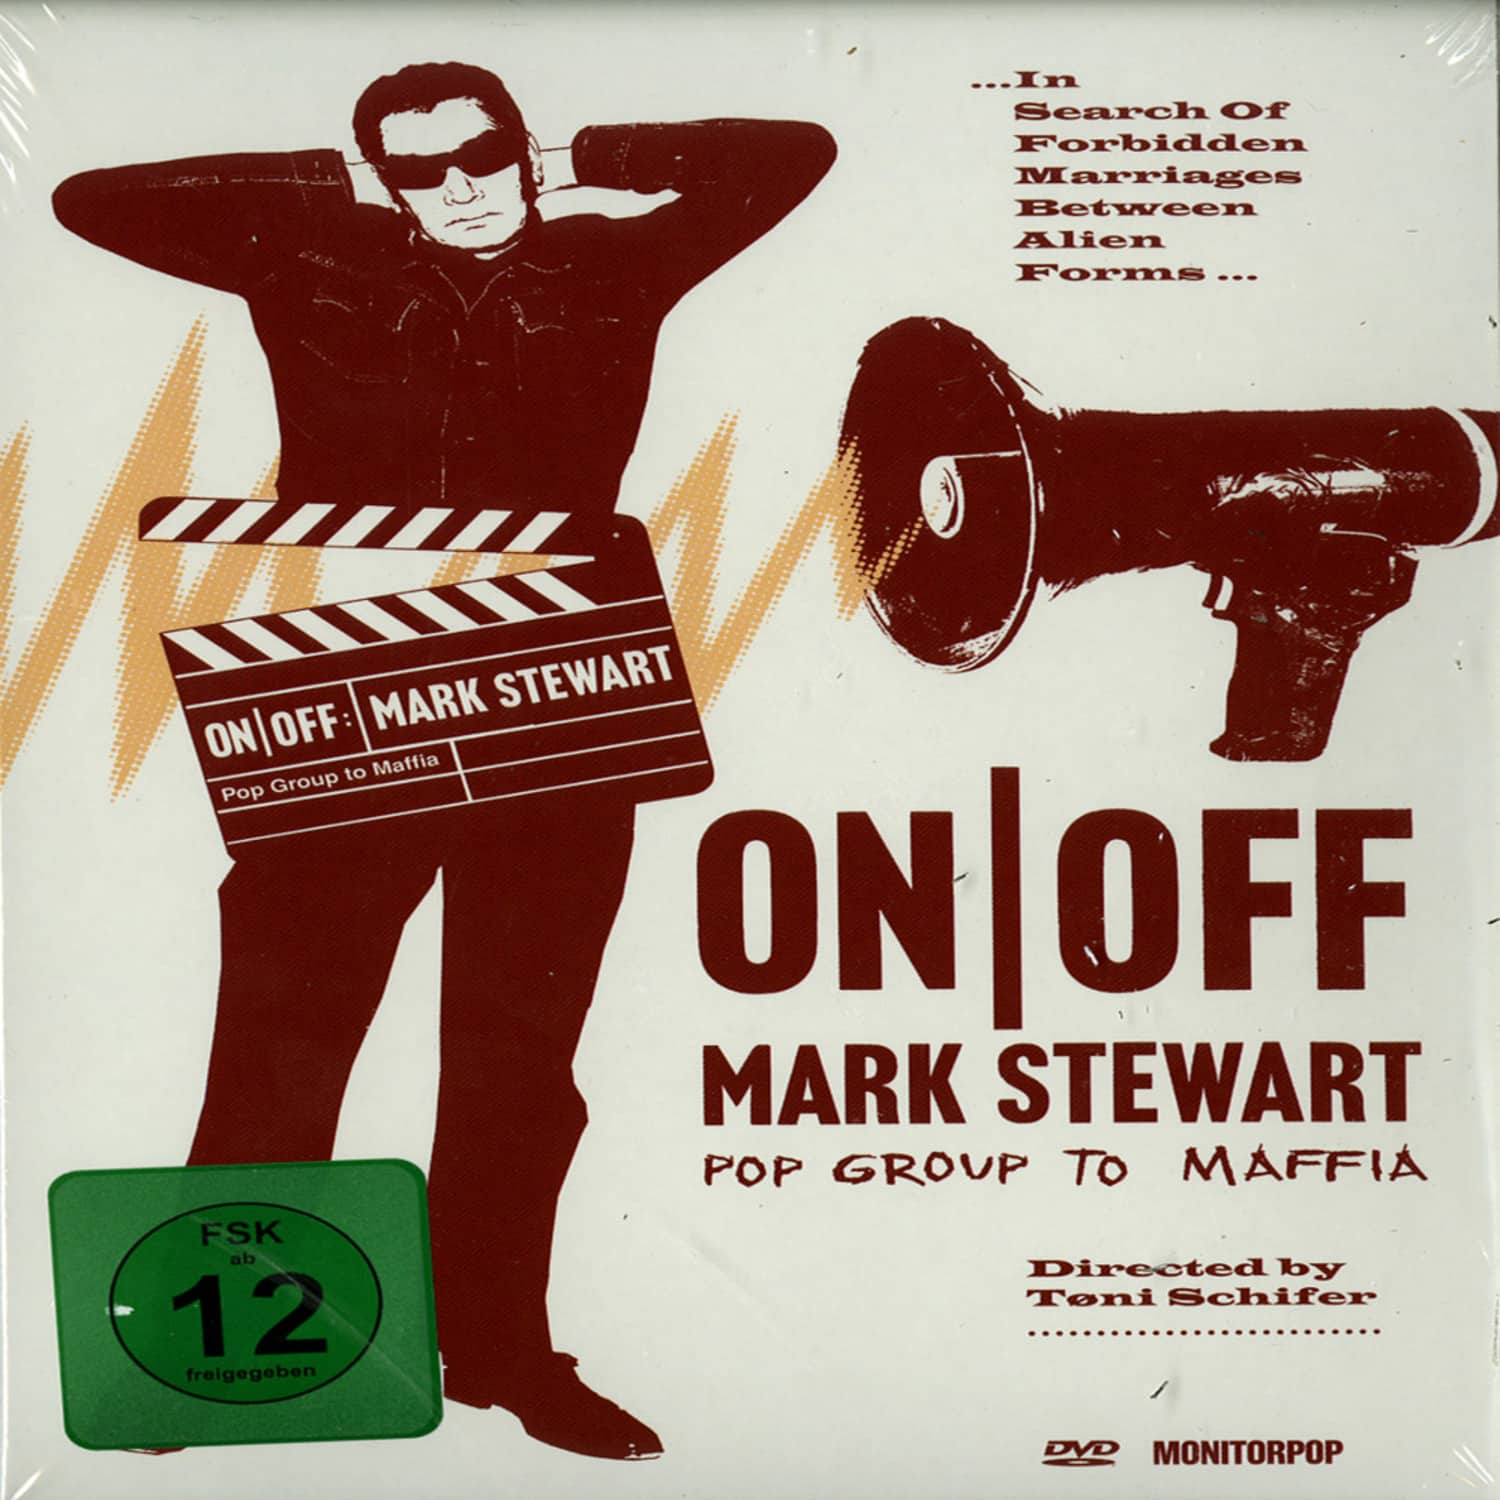 ON/OFF, Mark Stewart - FROM POP GROUP TO MAFFIA 